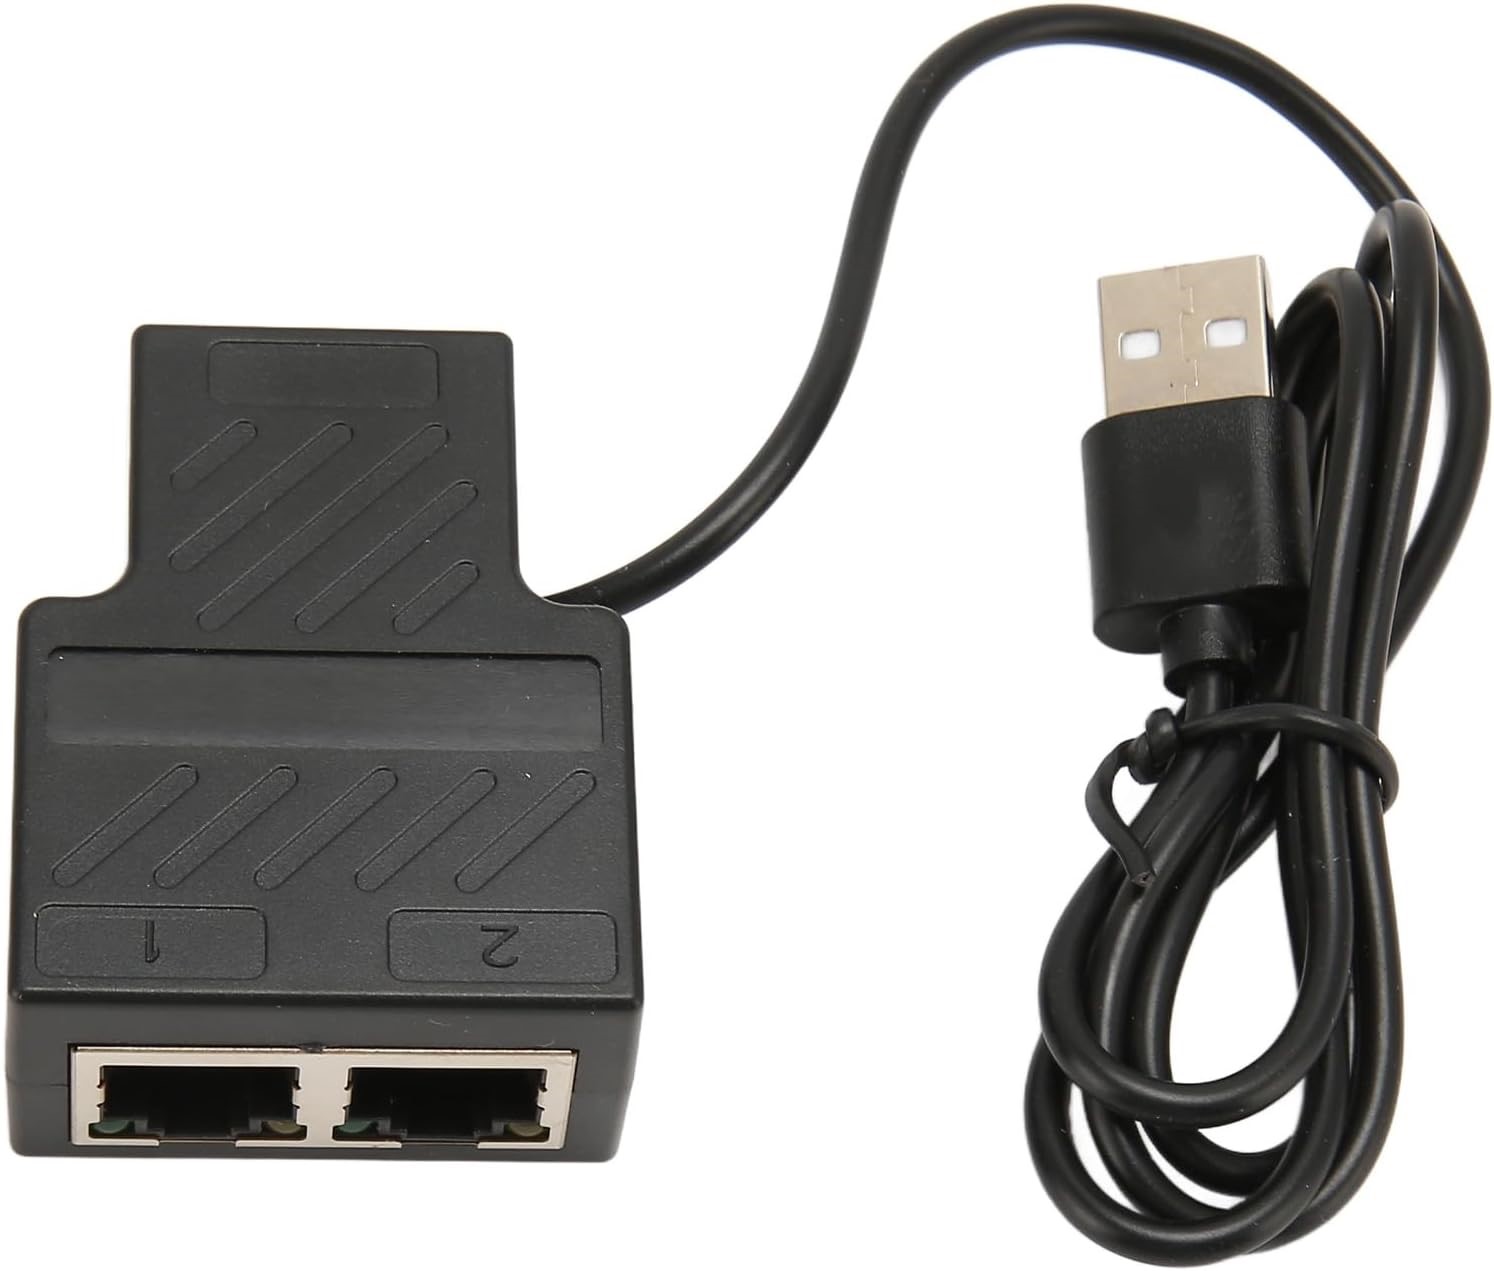 HF-RJ45-A1T2: 100Mbps Network Splitter, High Speed RJ45 Port 2 Devices Simultaneous Network Ethernet Splitter 1 to 2 USB Power Supply with USB Power Cable for Computers